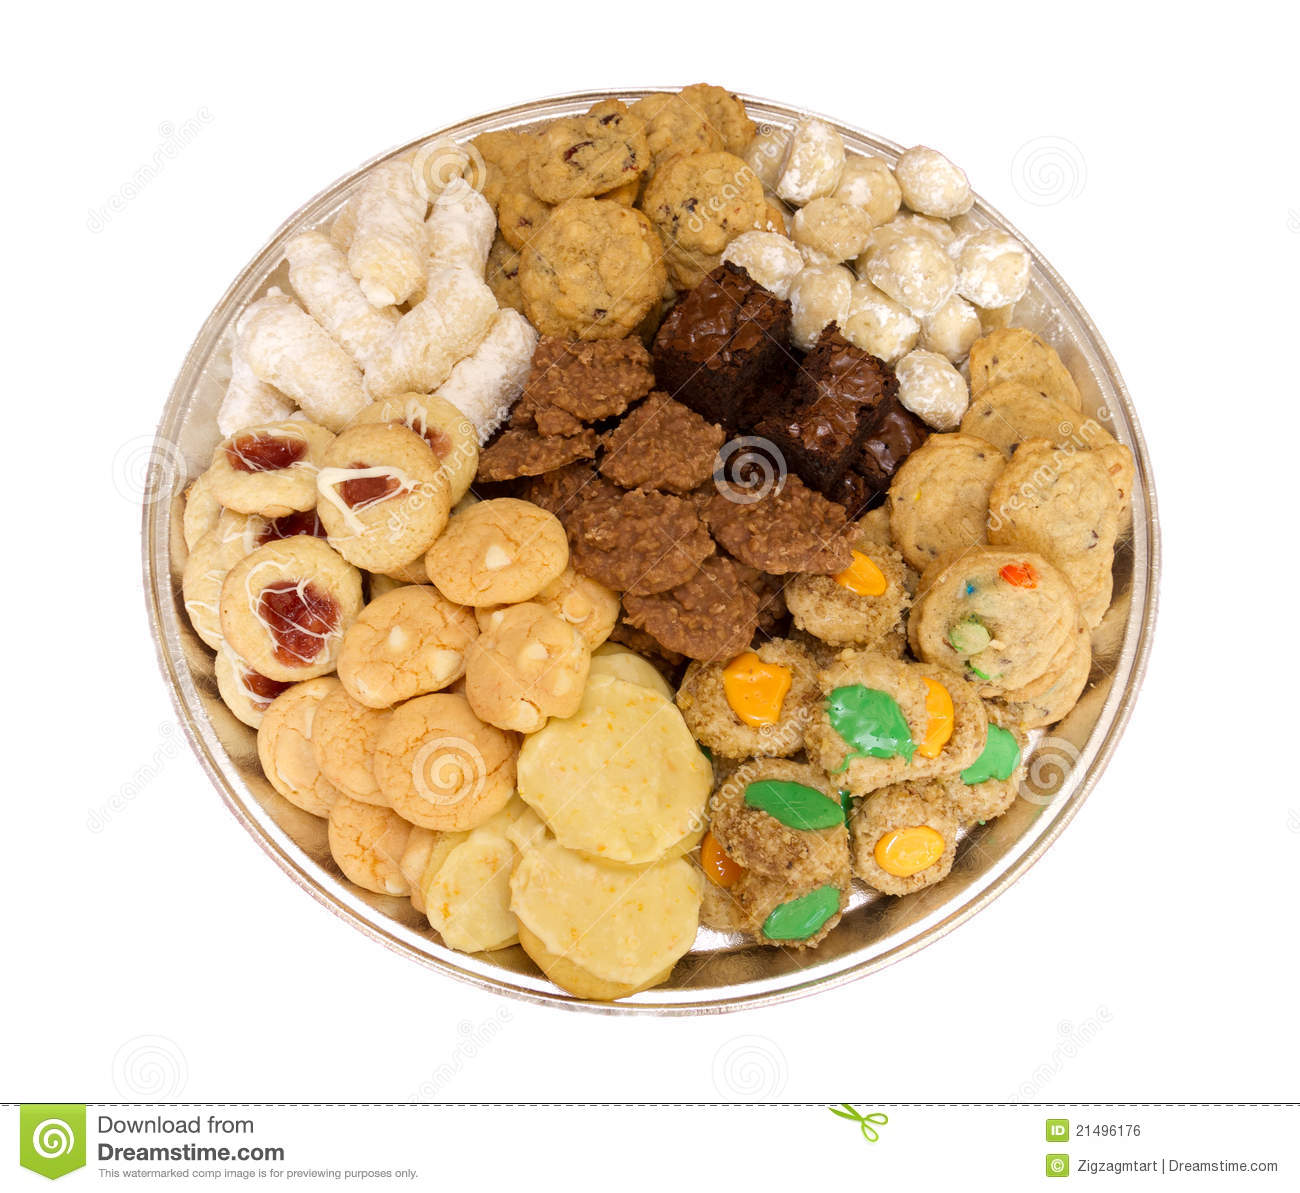 Homemade Fresh Baked Assortment Of Cookies On Tray Isolated On White